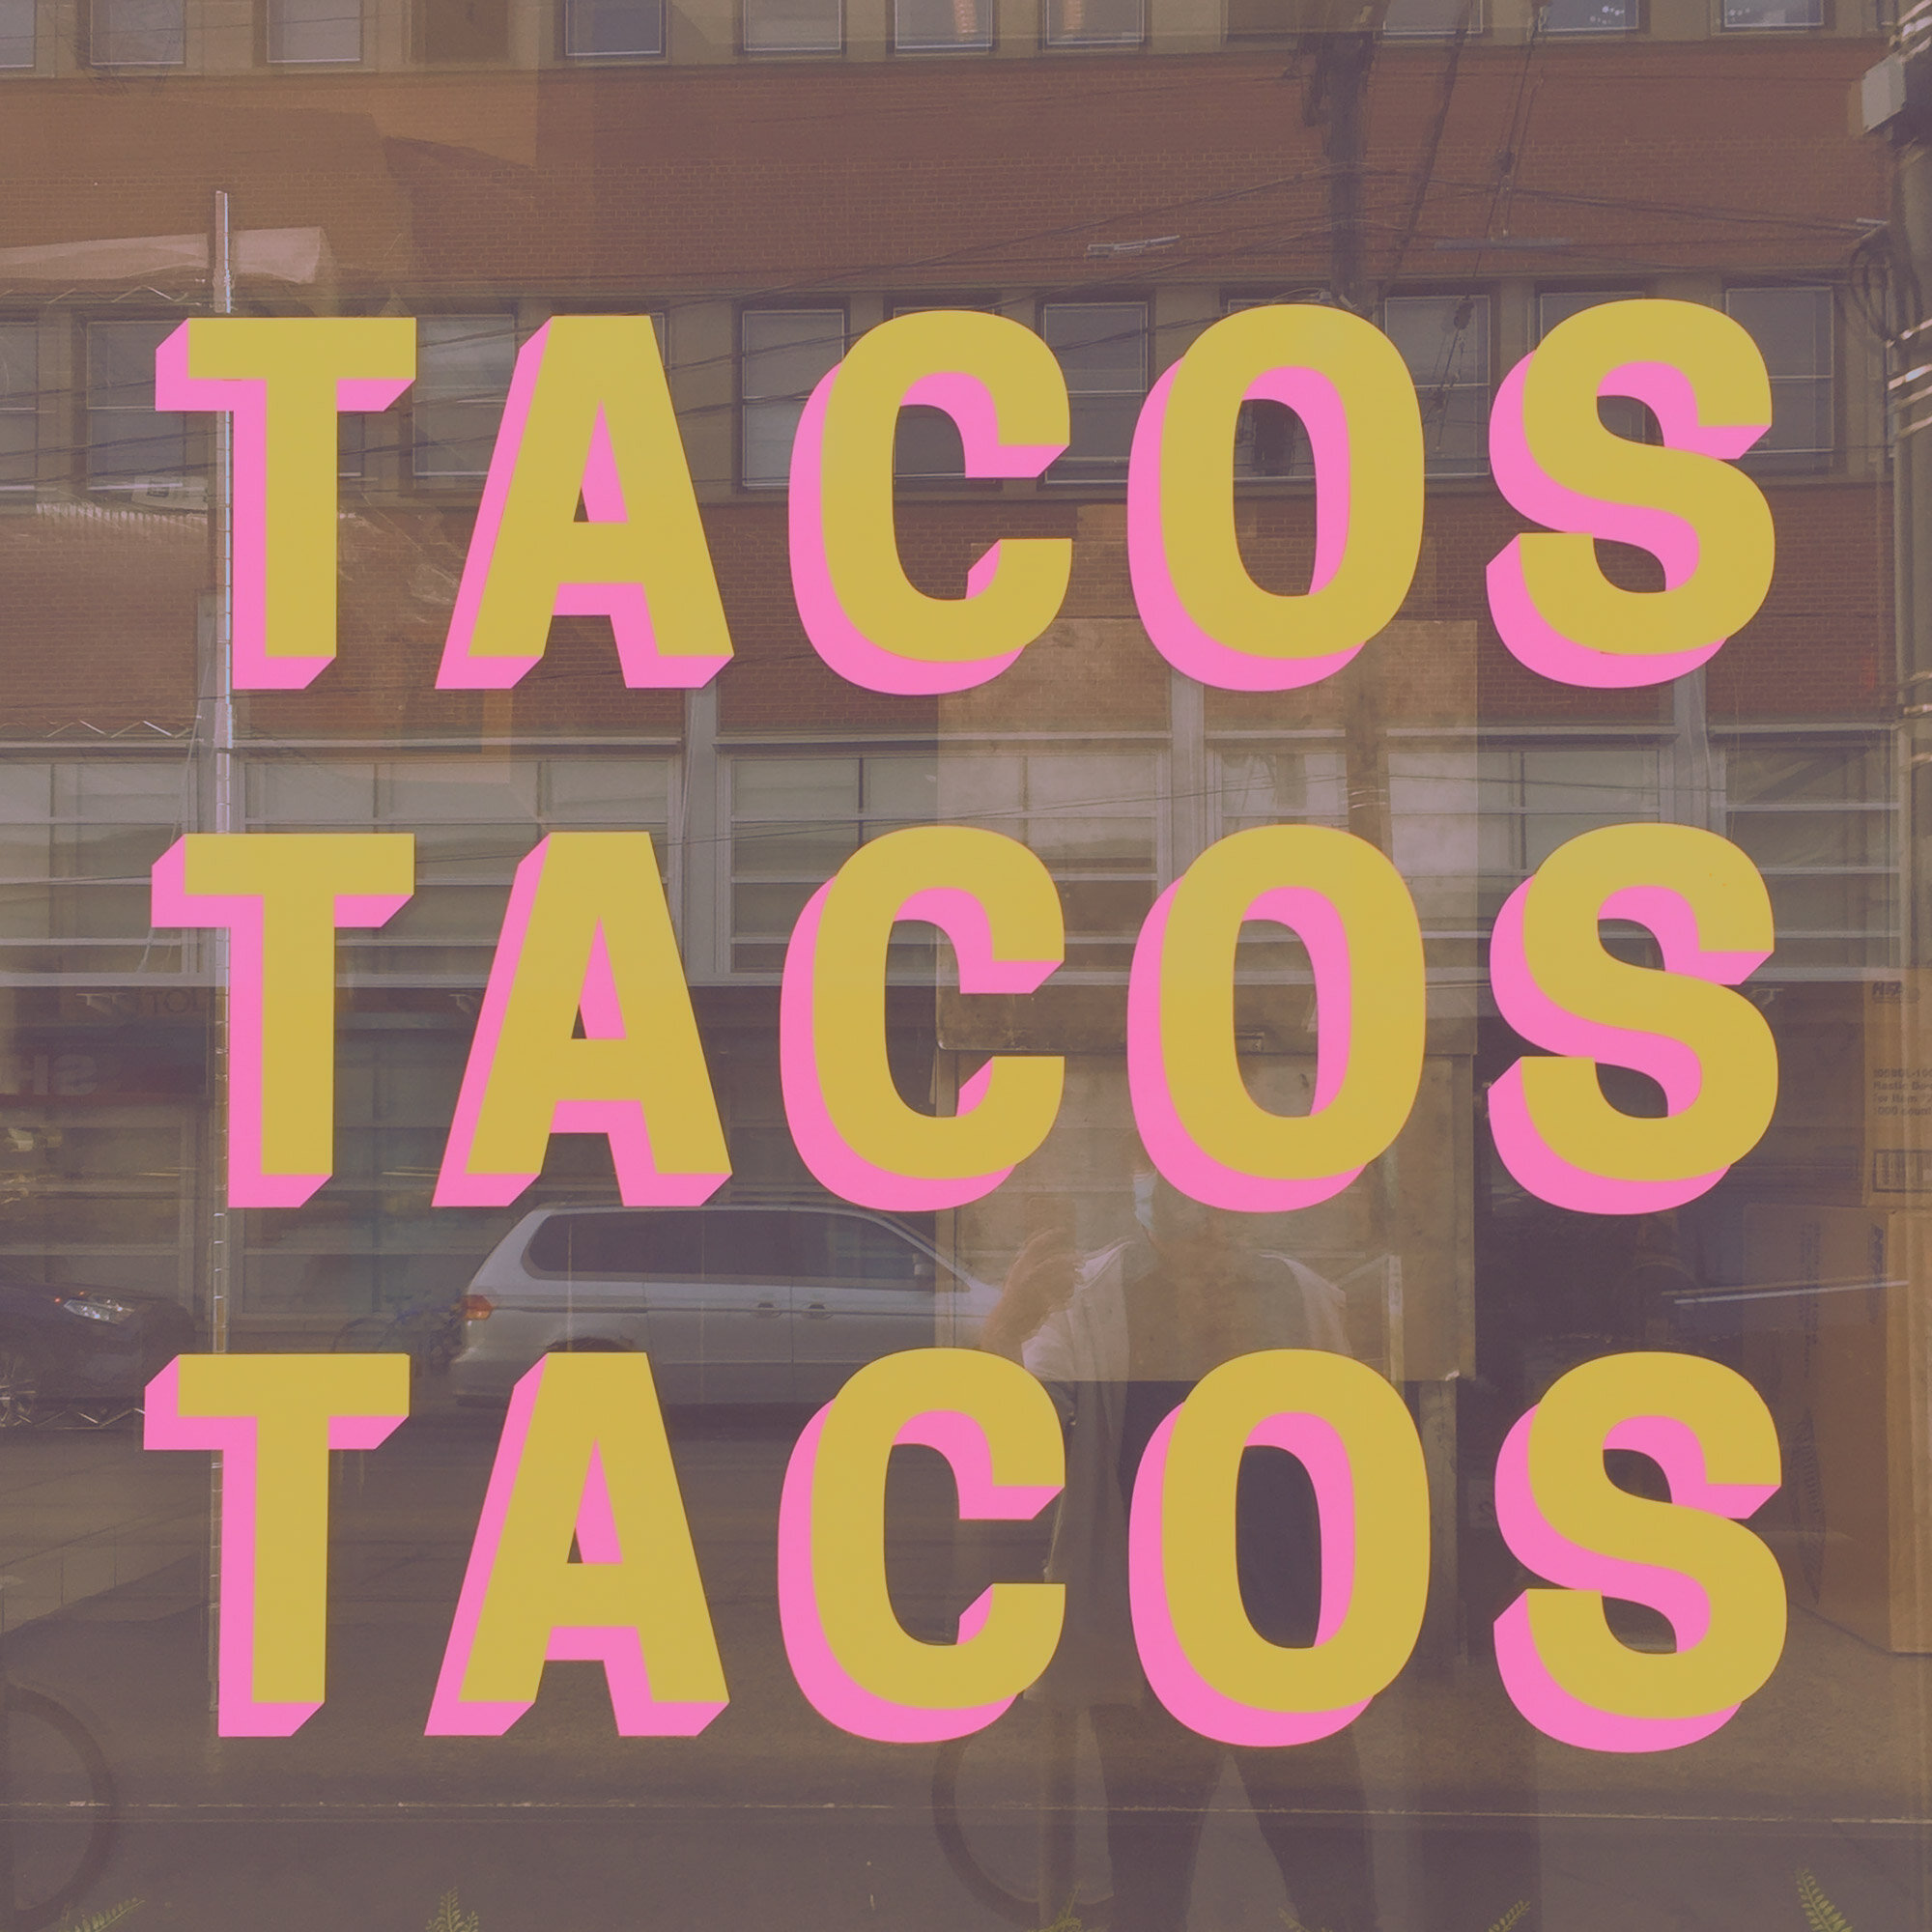 Don't forget, tomorrow we'll have breakfast tacos for sale! The tacos are made by and will fund our college students going on a mission trip to Portland with the Longhorn BSM this summer. They'll be served from 8:30AM to 10:10AM, get 'em while they'r